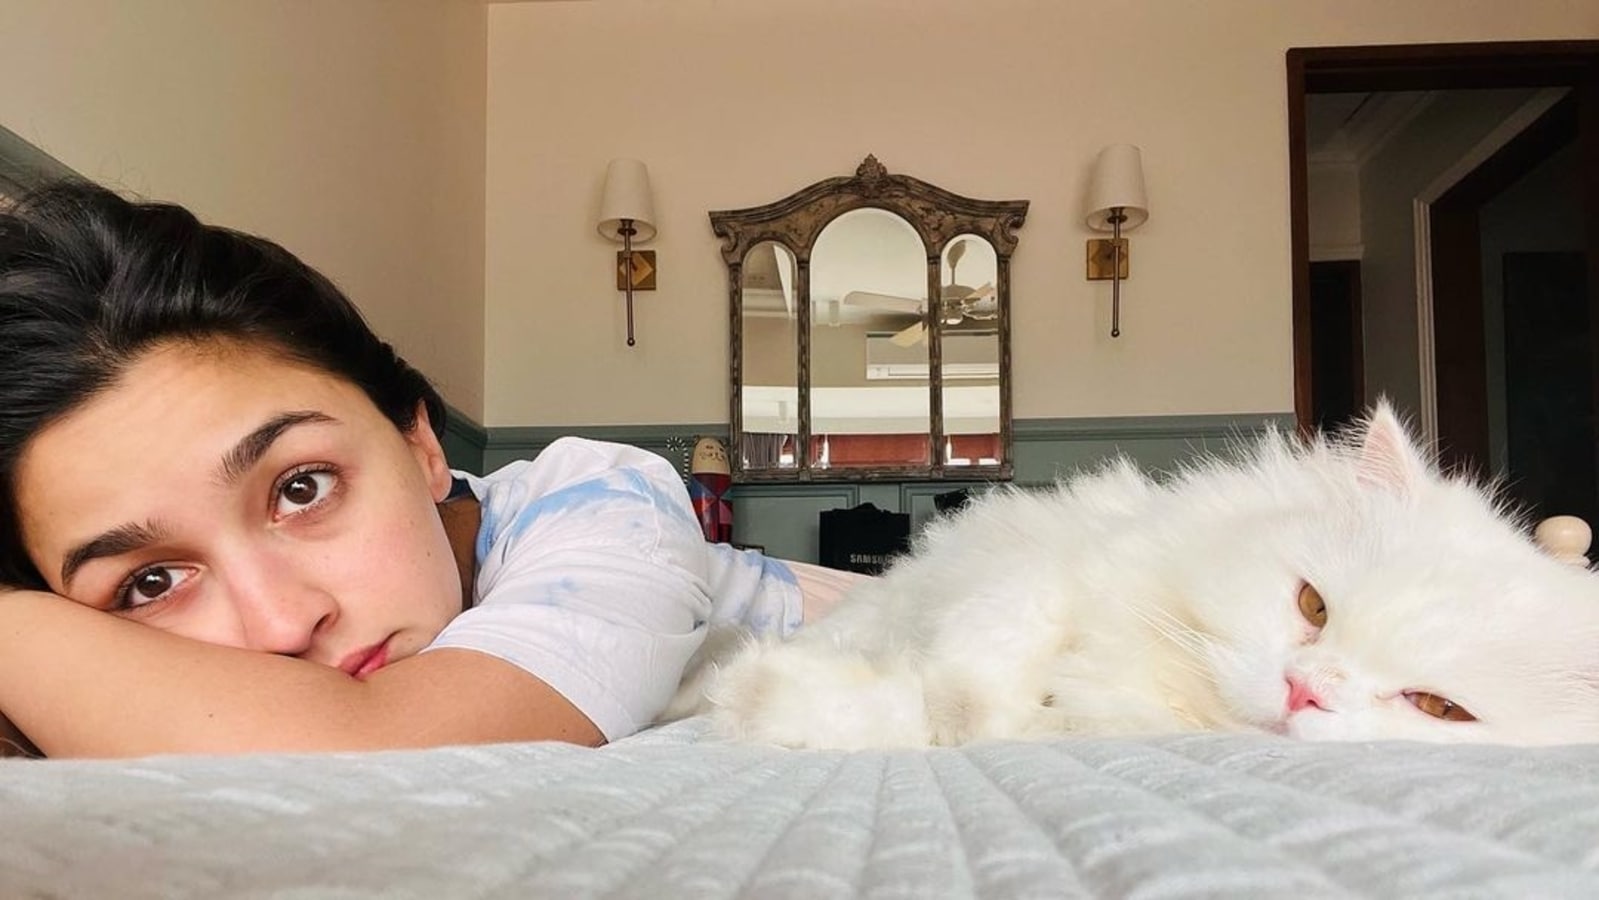 Alia Bhatt gives a glimpse of her bedroom as she chills with pet cat  Edward. See pic | Bollywood - Hindustan Times